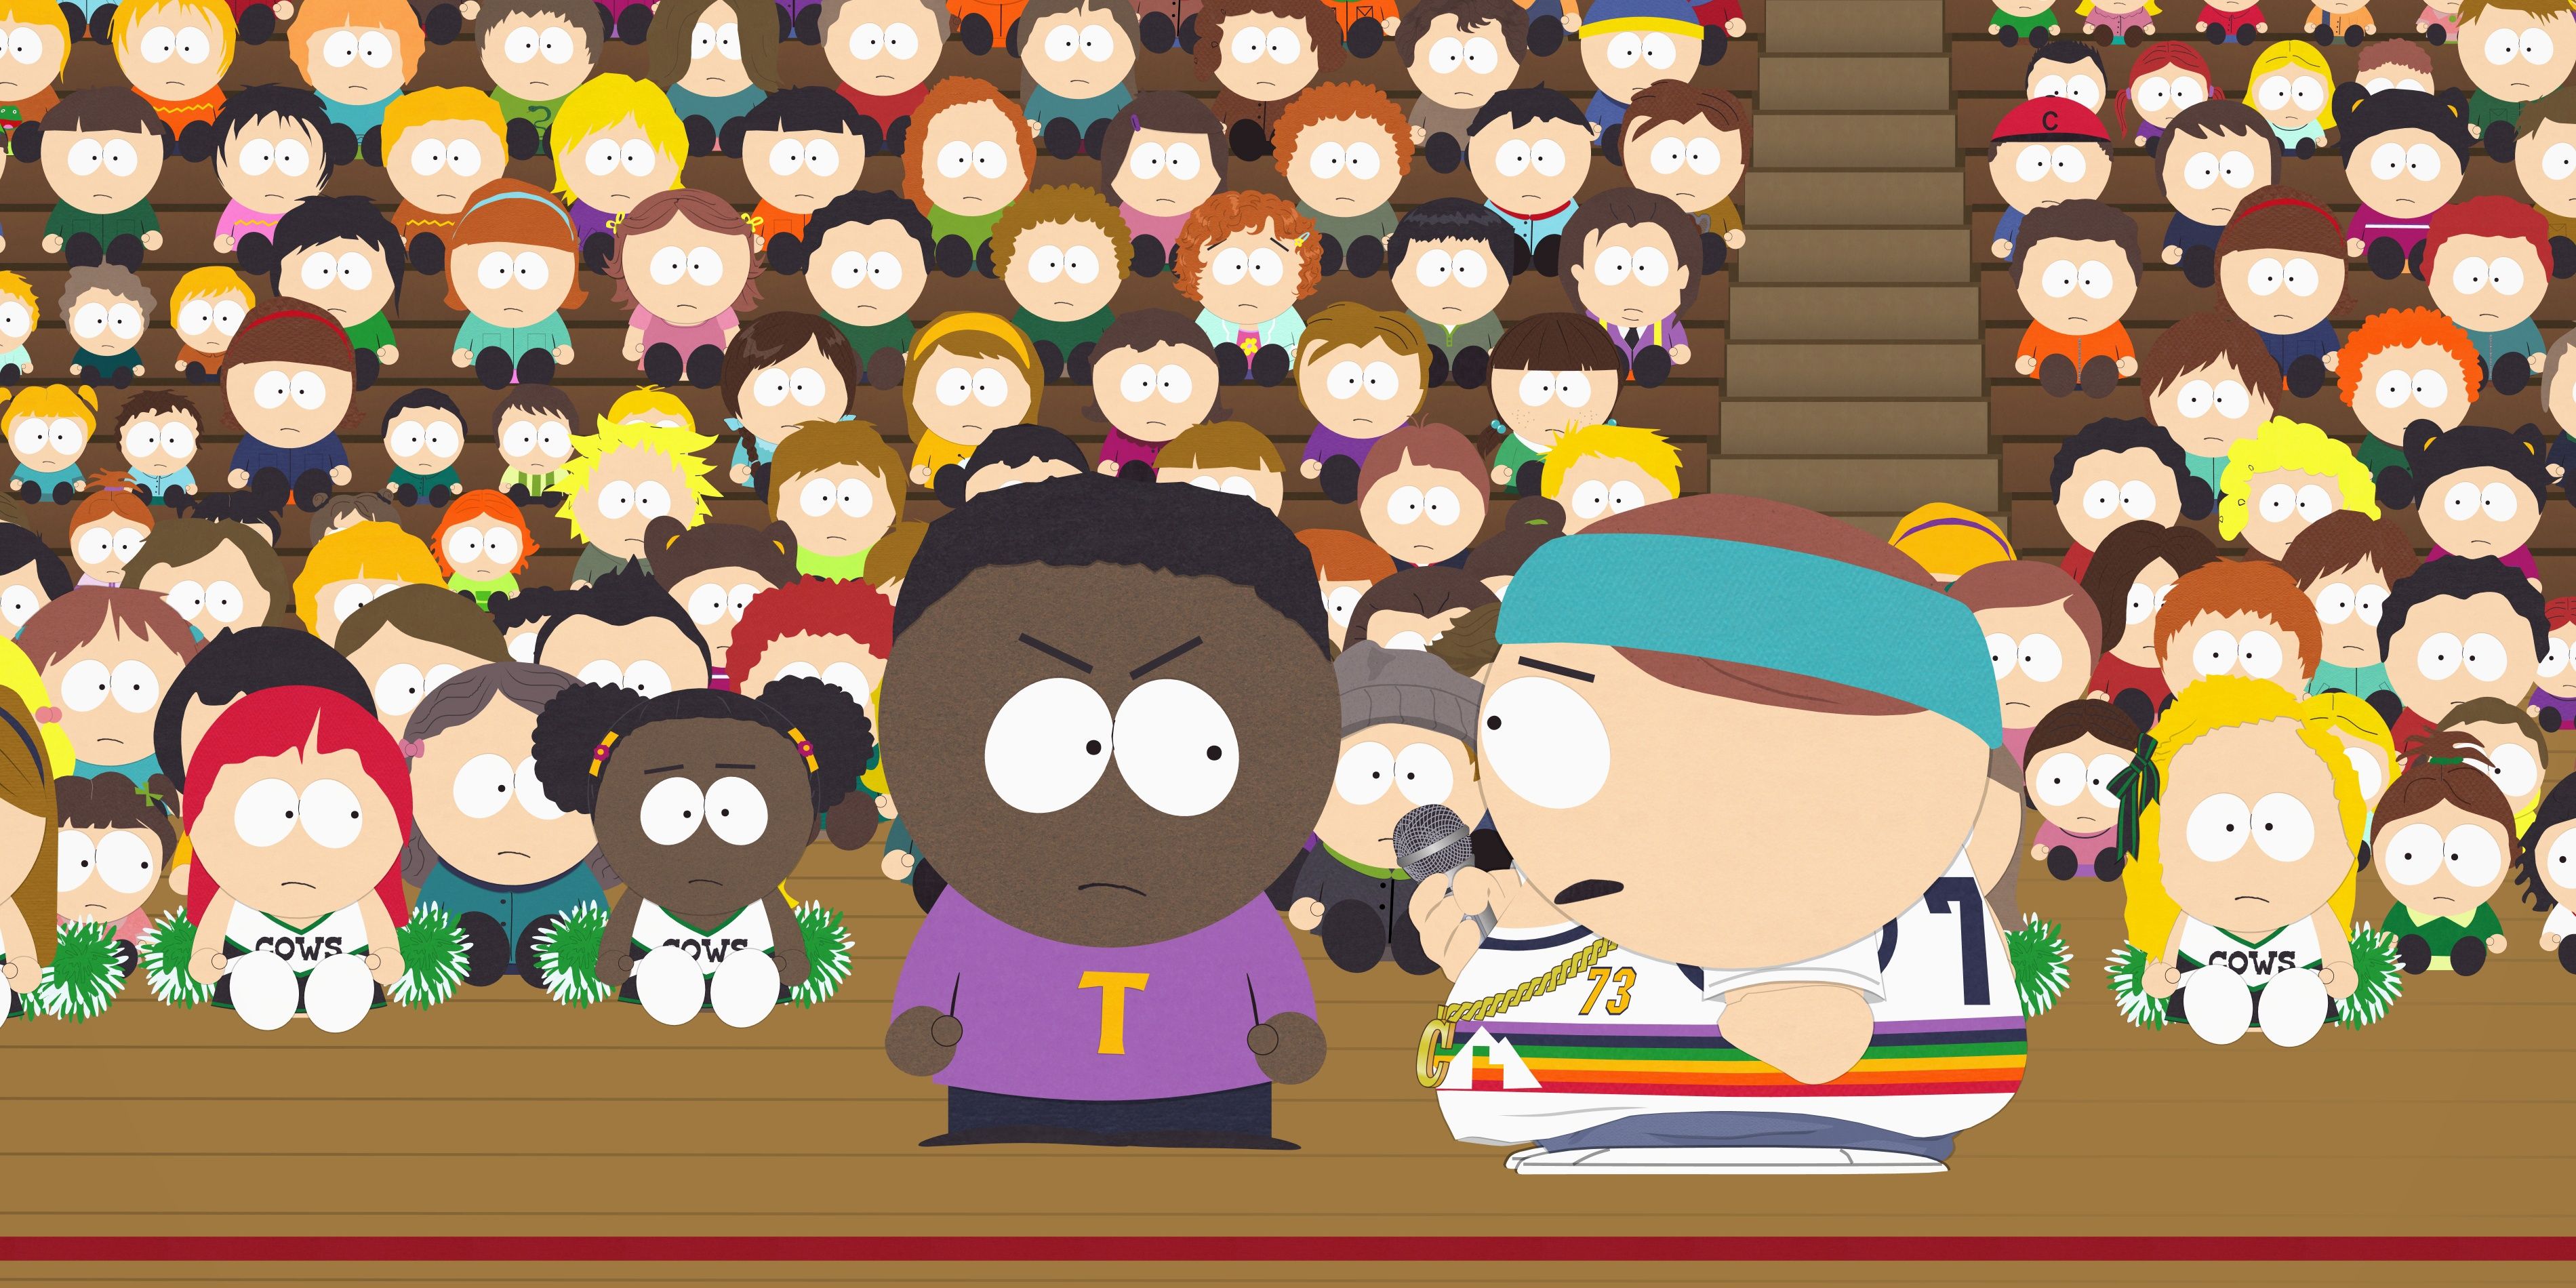 10 Times South Parks Satire Was Spot On